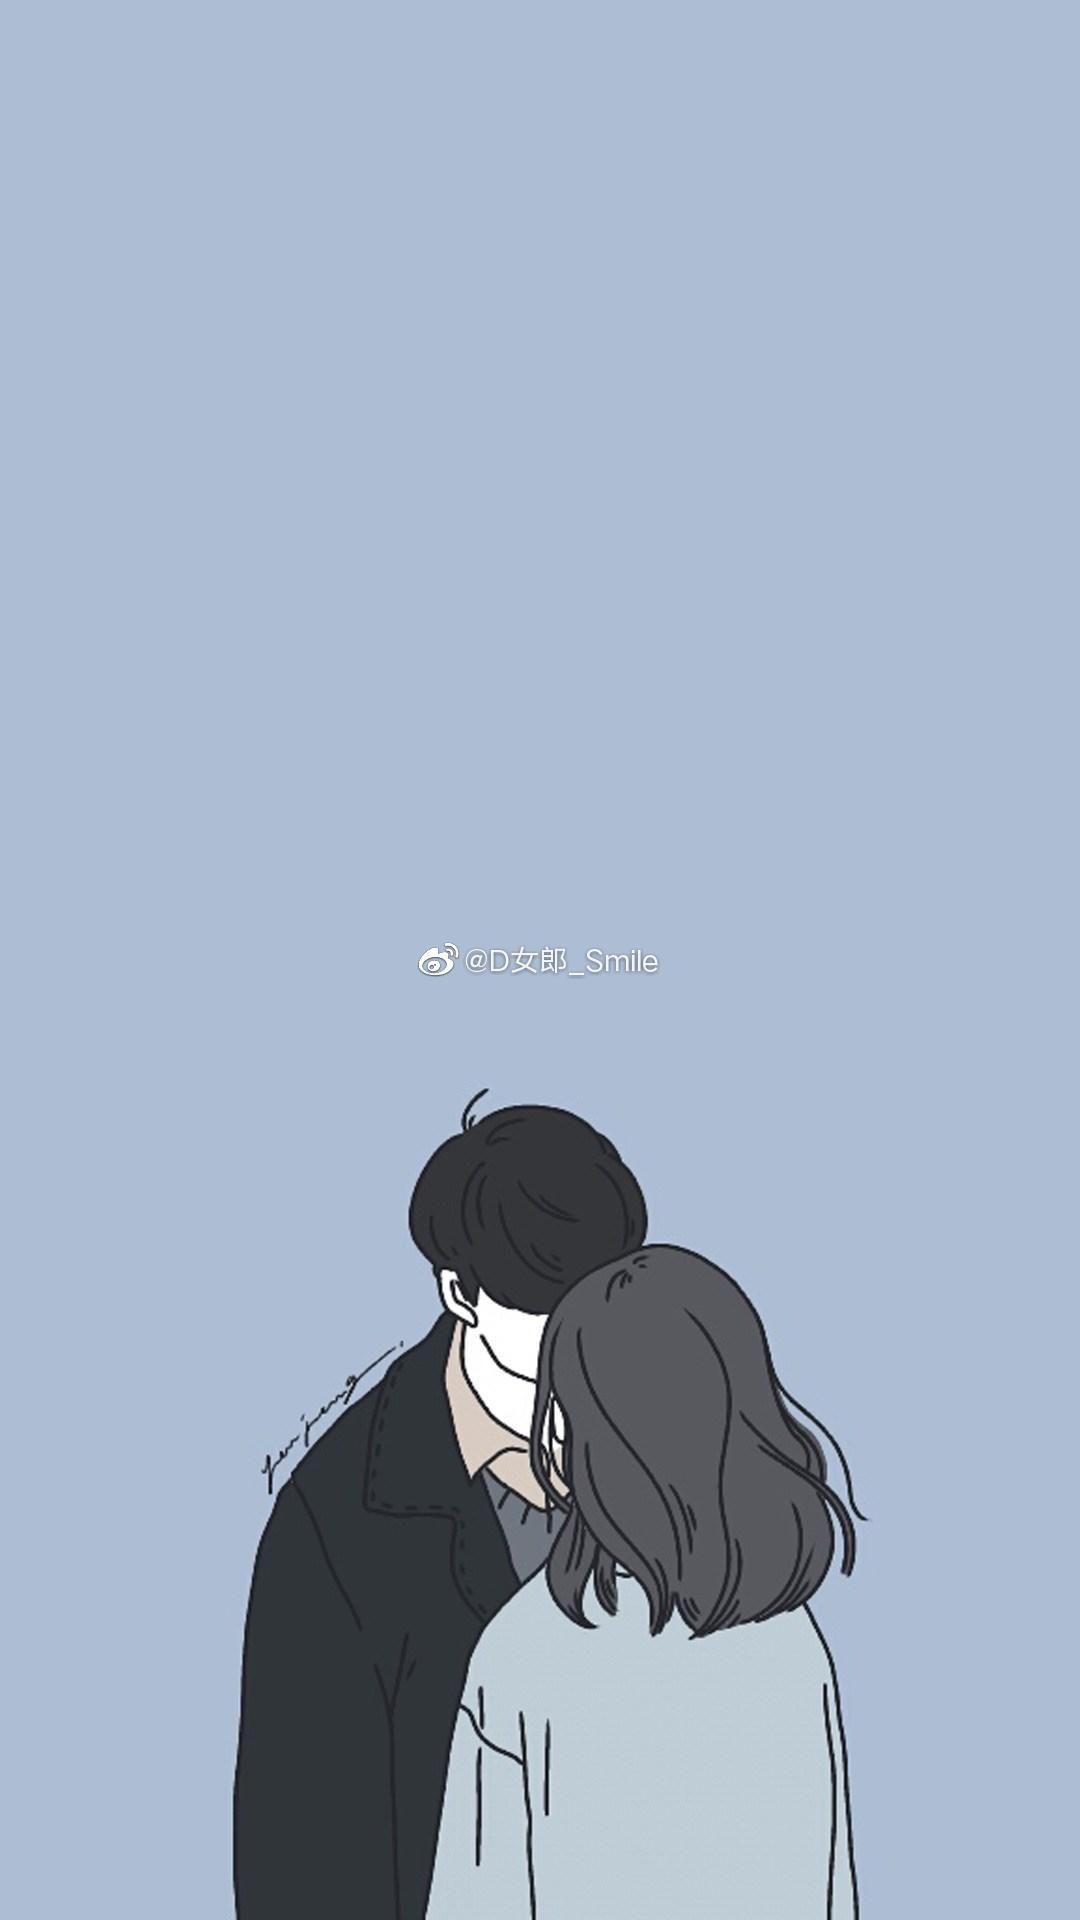 Aesthetic Anime Couple Wallpapers - Top Free Aesthetic Anime